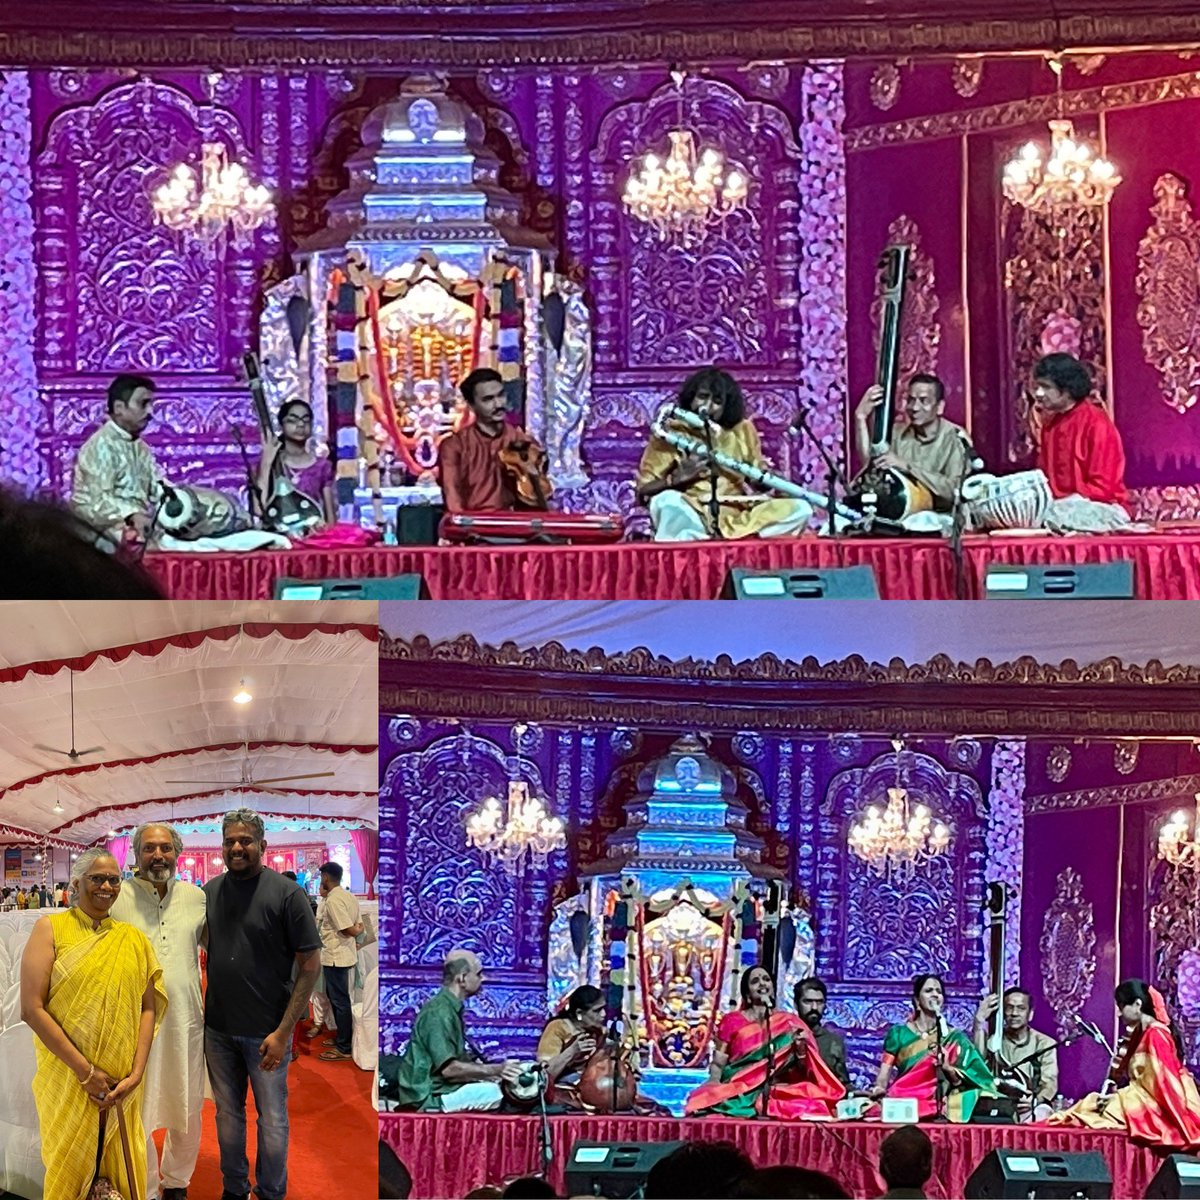 What a performance it was. Enjoyed the Jugalbandi from @pravingodkhindi and @AmbiSub @MandalisMusic and the ‘nok-jonk’ between Bangalore V Praveen and @Ojastabla Can’t wait for @harish_io to perform today. Will he or won’t he sing Sri Rangapura Vihara 🤔